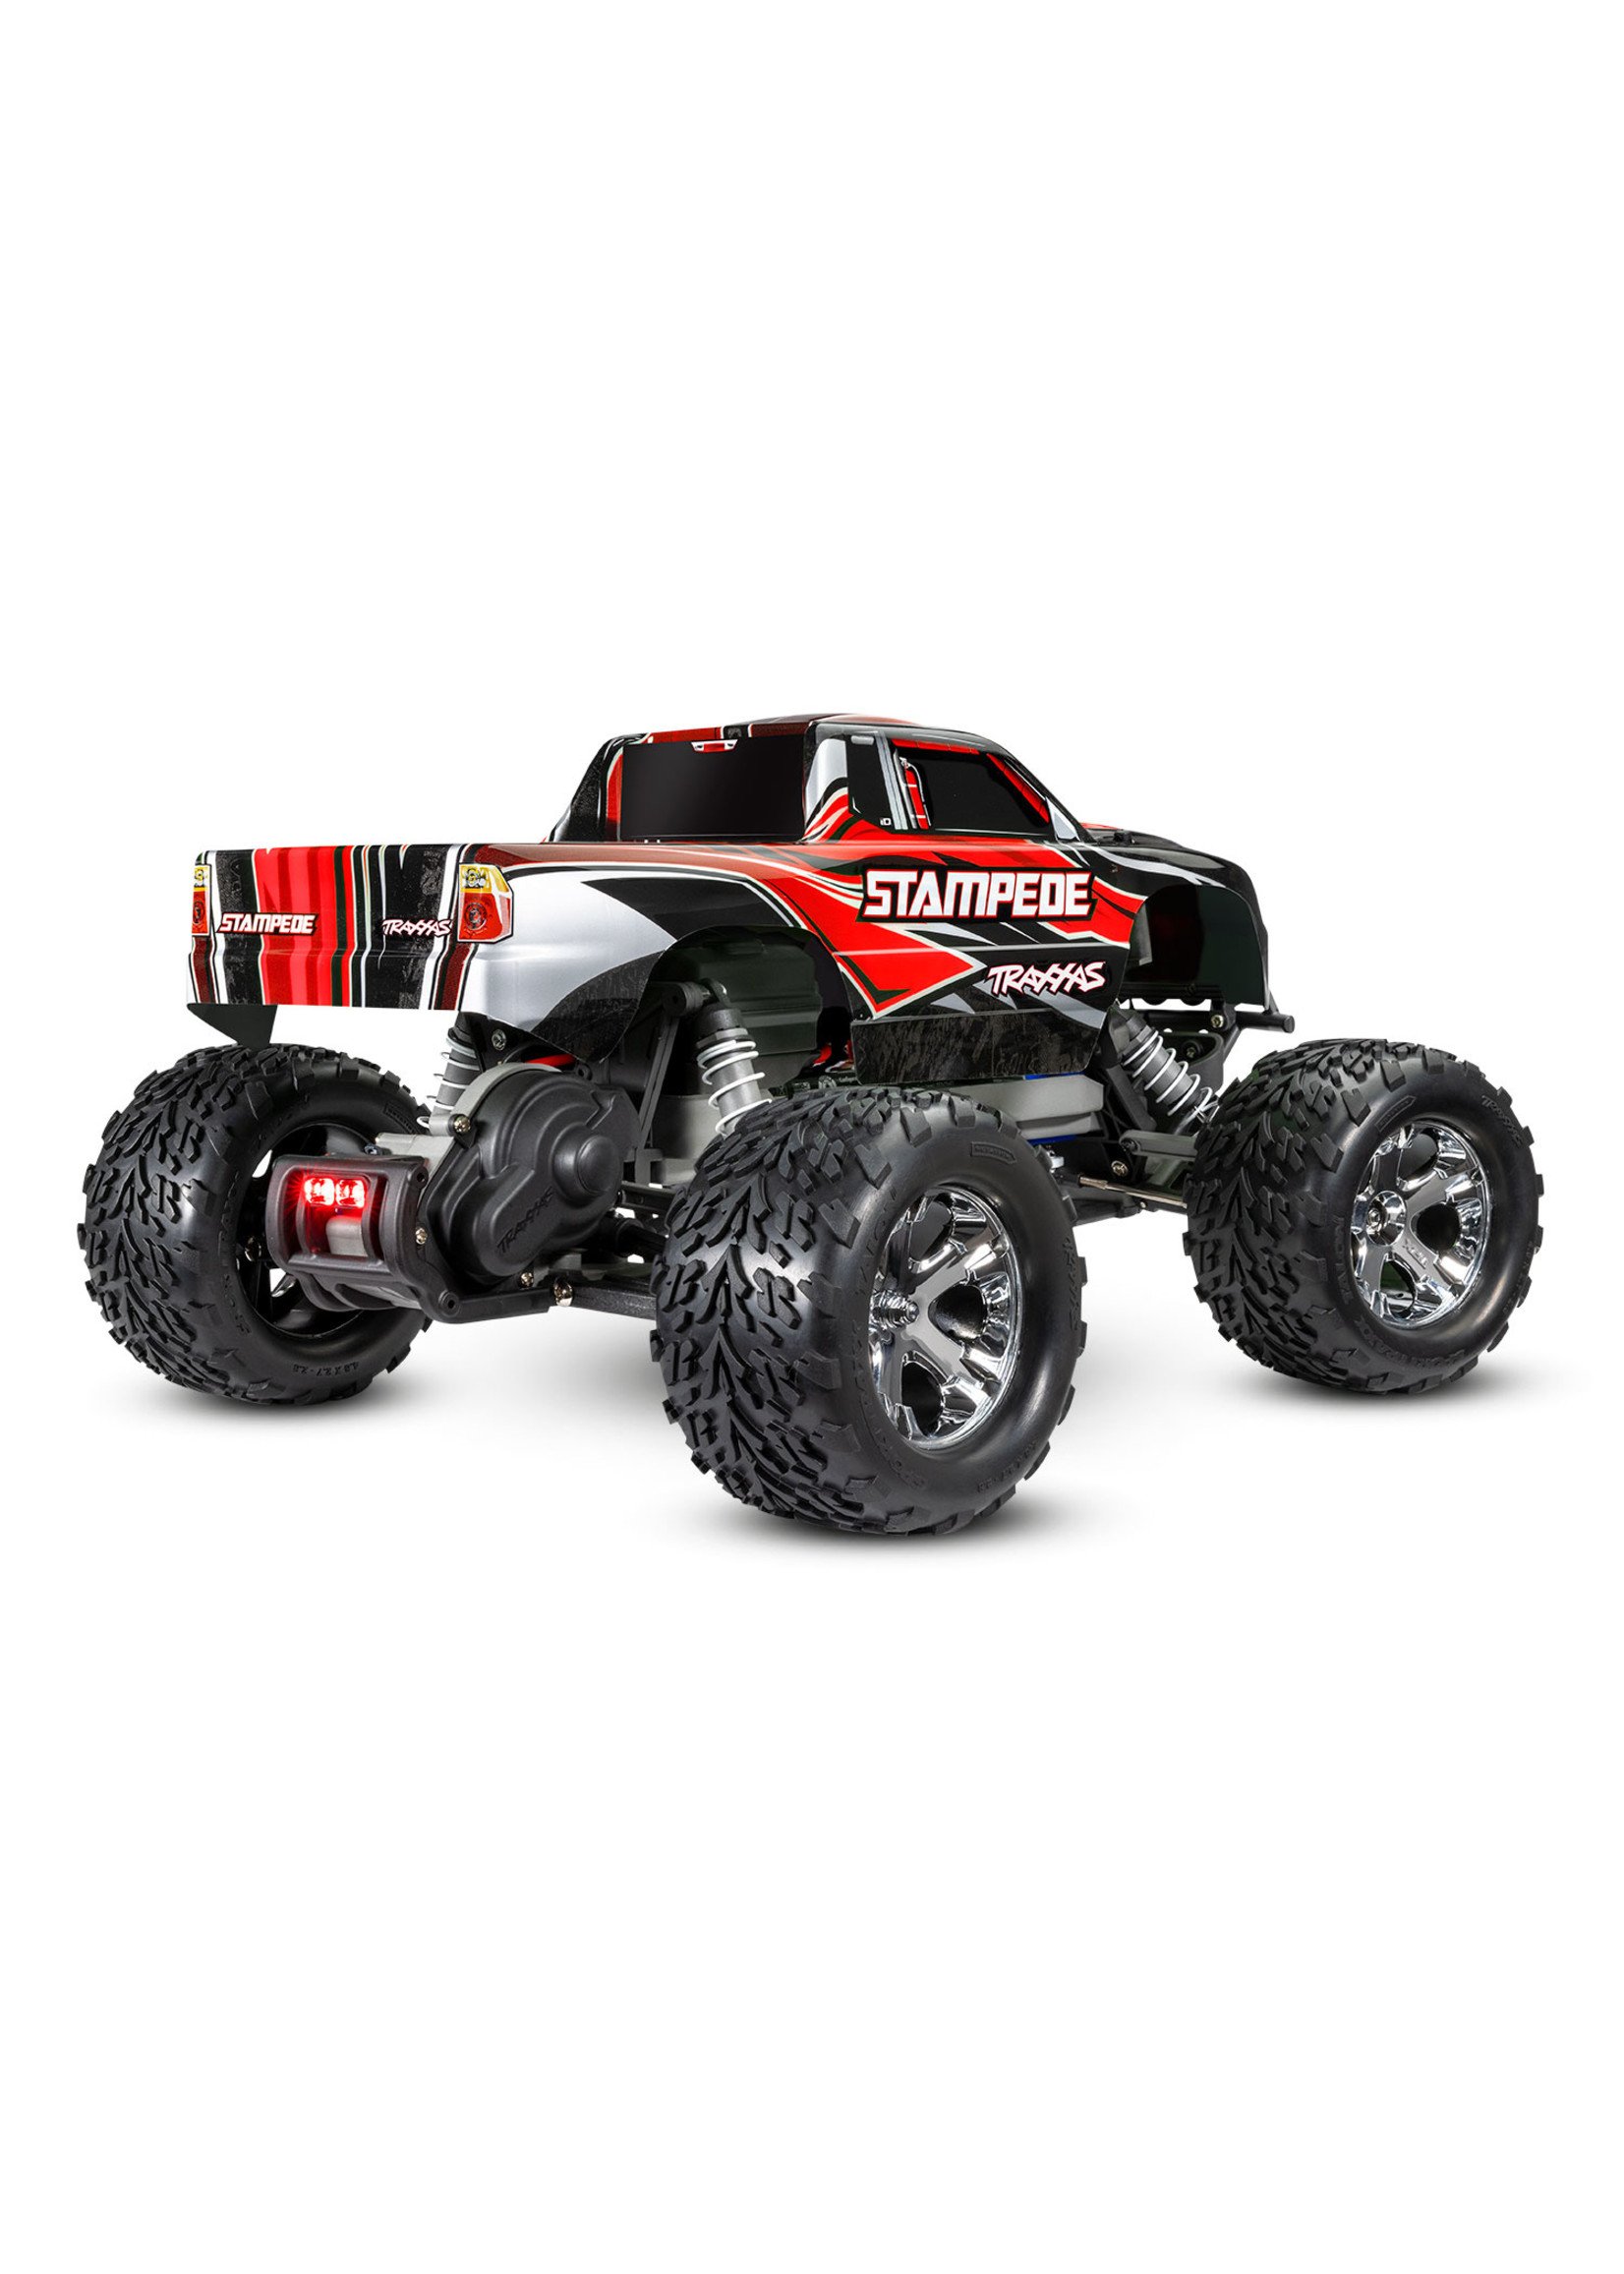 Traxxas 1/10 Stampede 2WD RTR Monster Truck with Lights - Red